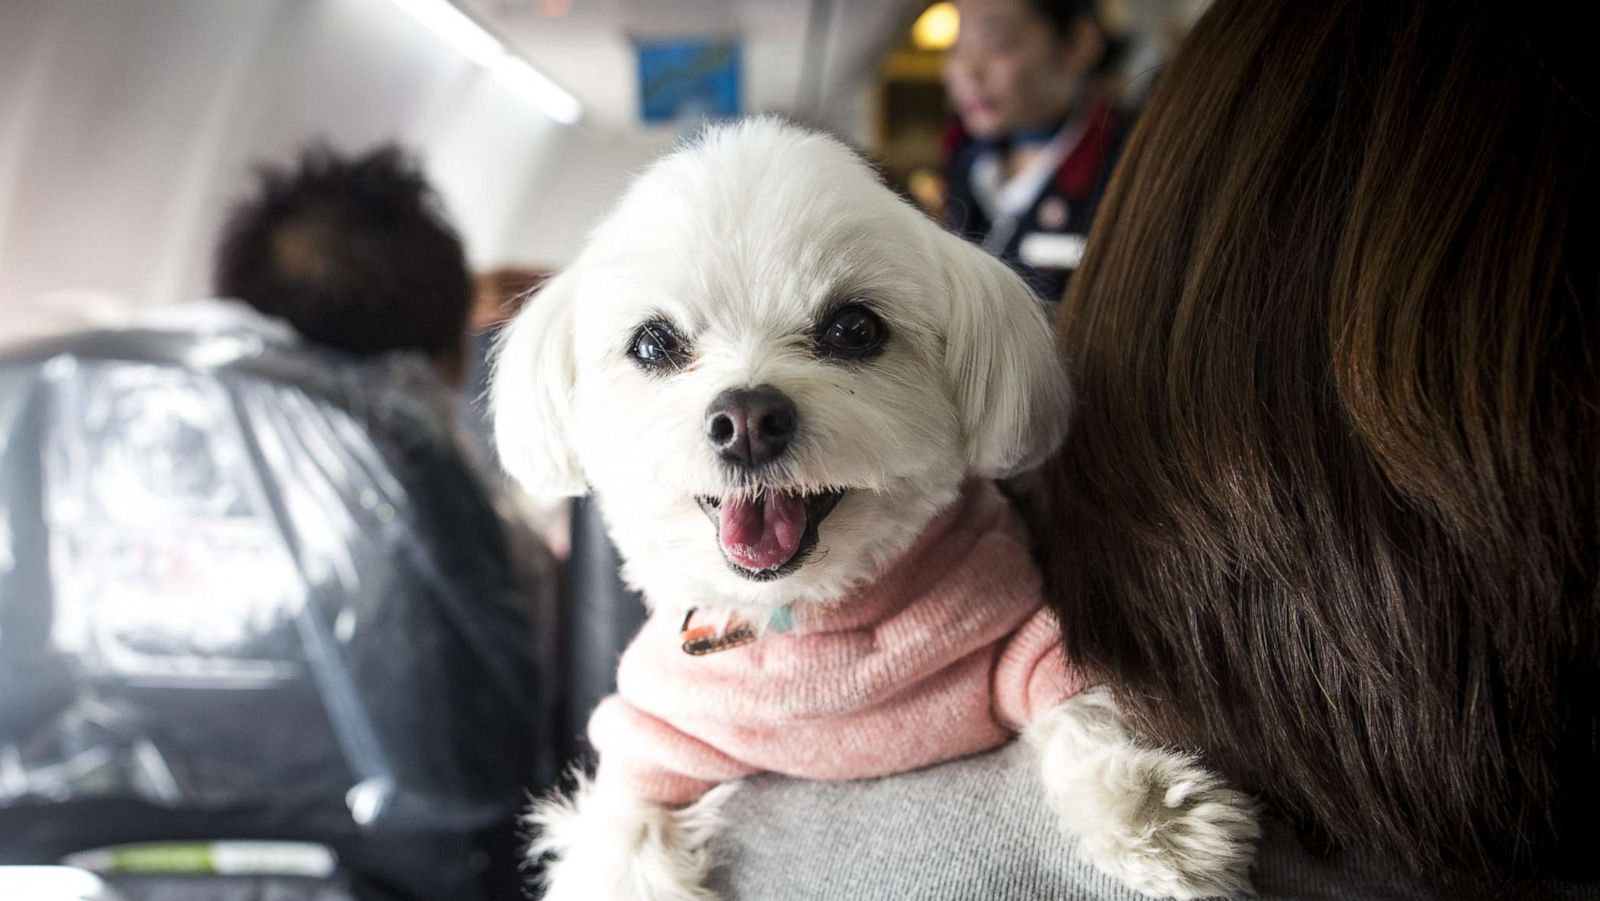 delta airlines travel with dogs